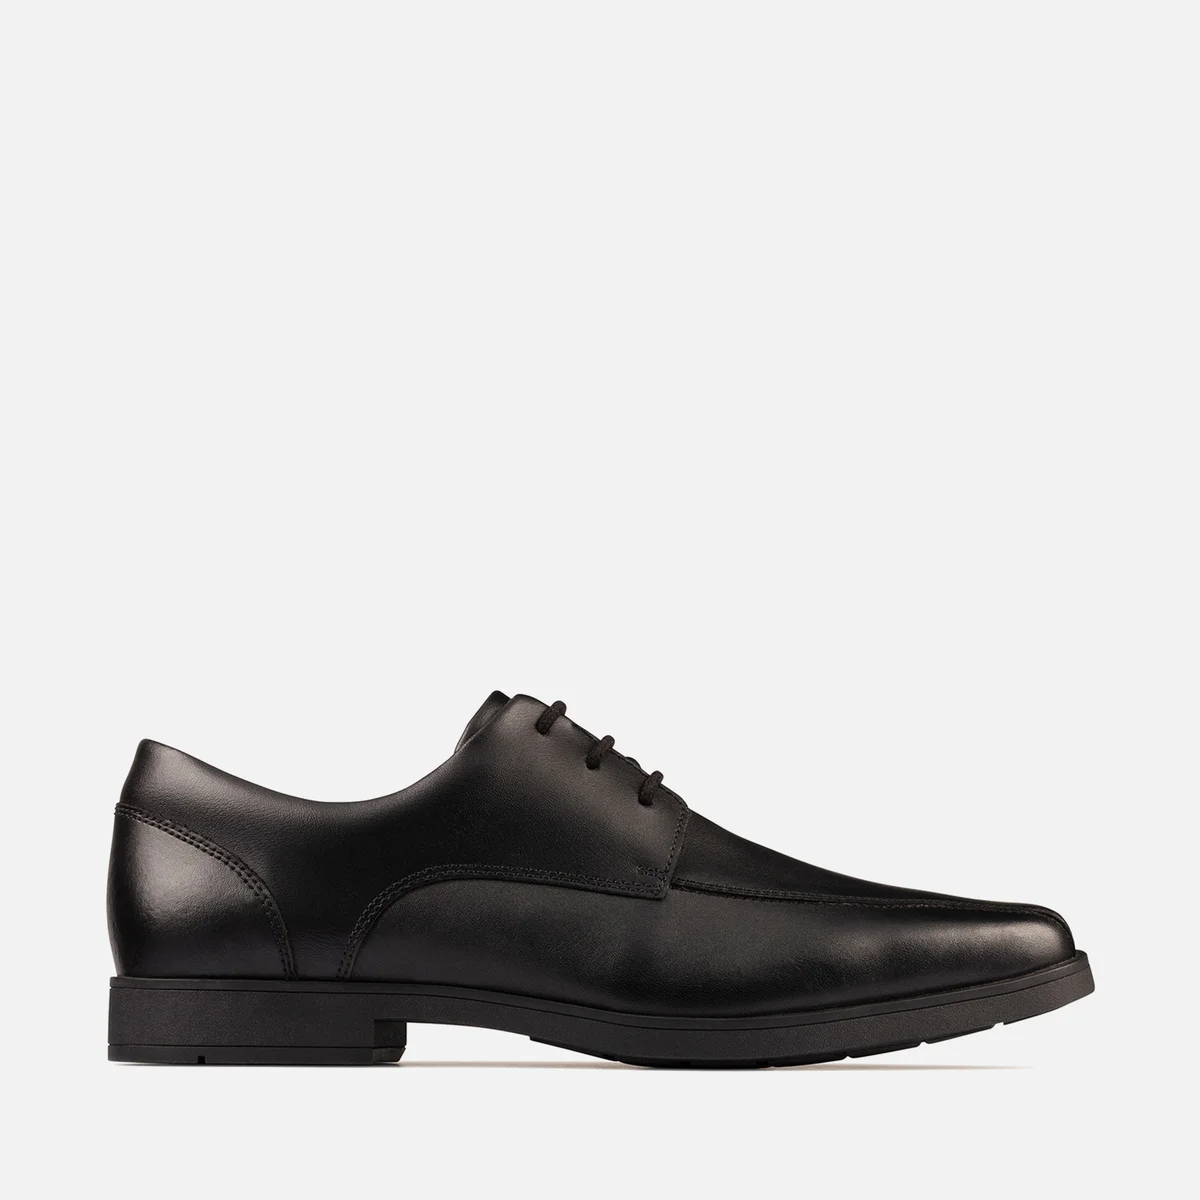 Clarks Youth Scala Step School Shoes - Black Leather Image 1